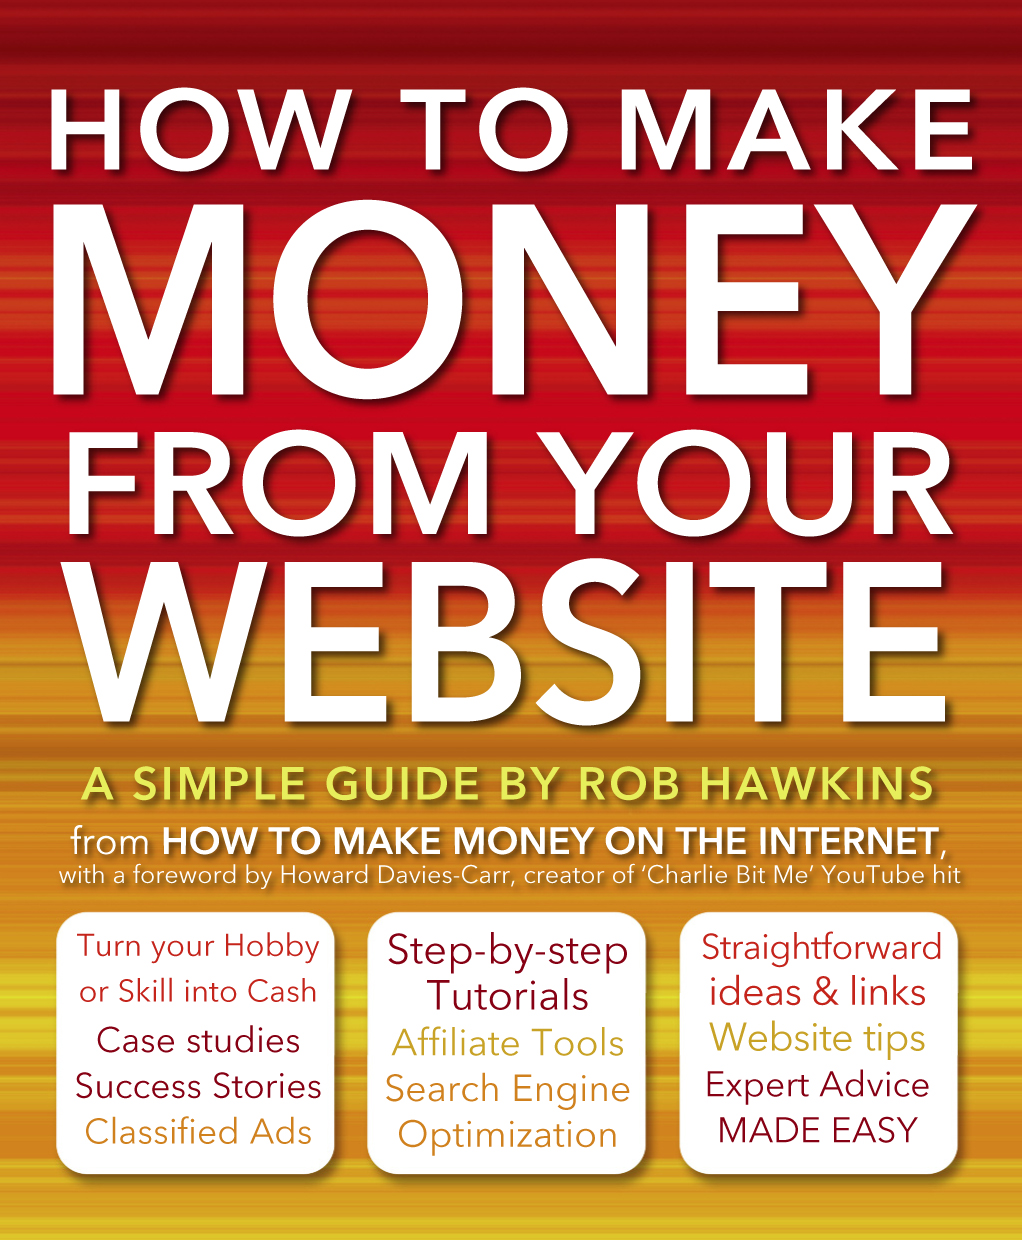 How to Make Money from Your Website. Expert Advice Made Easy